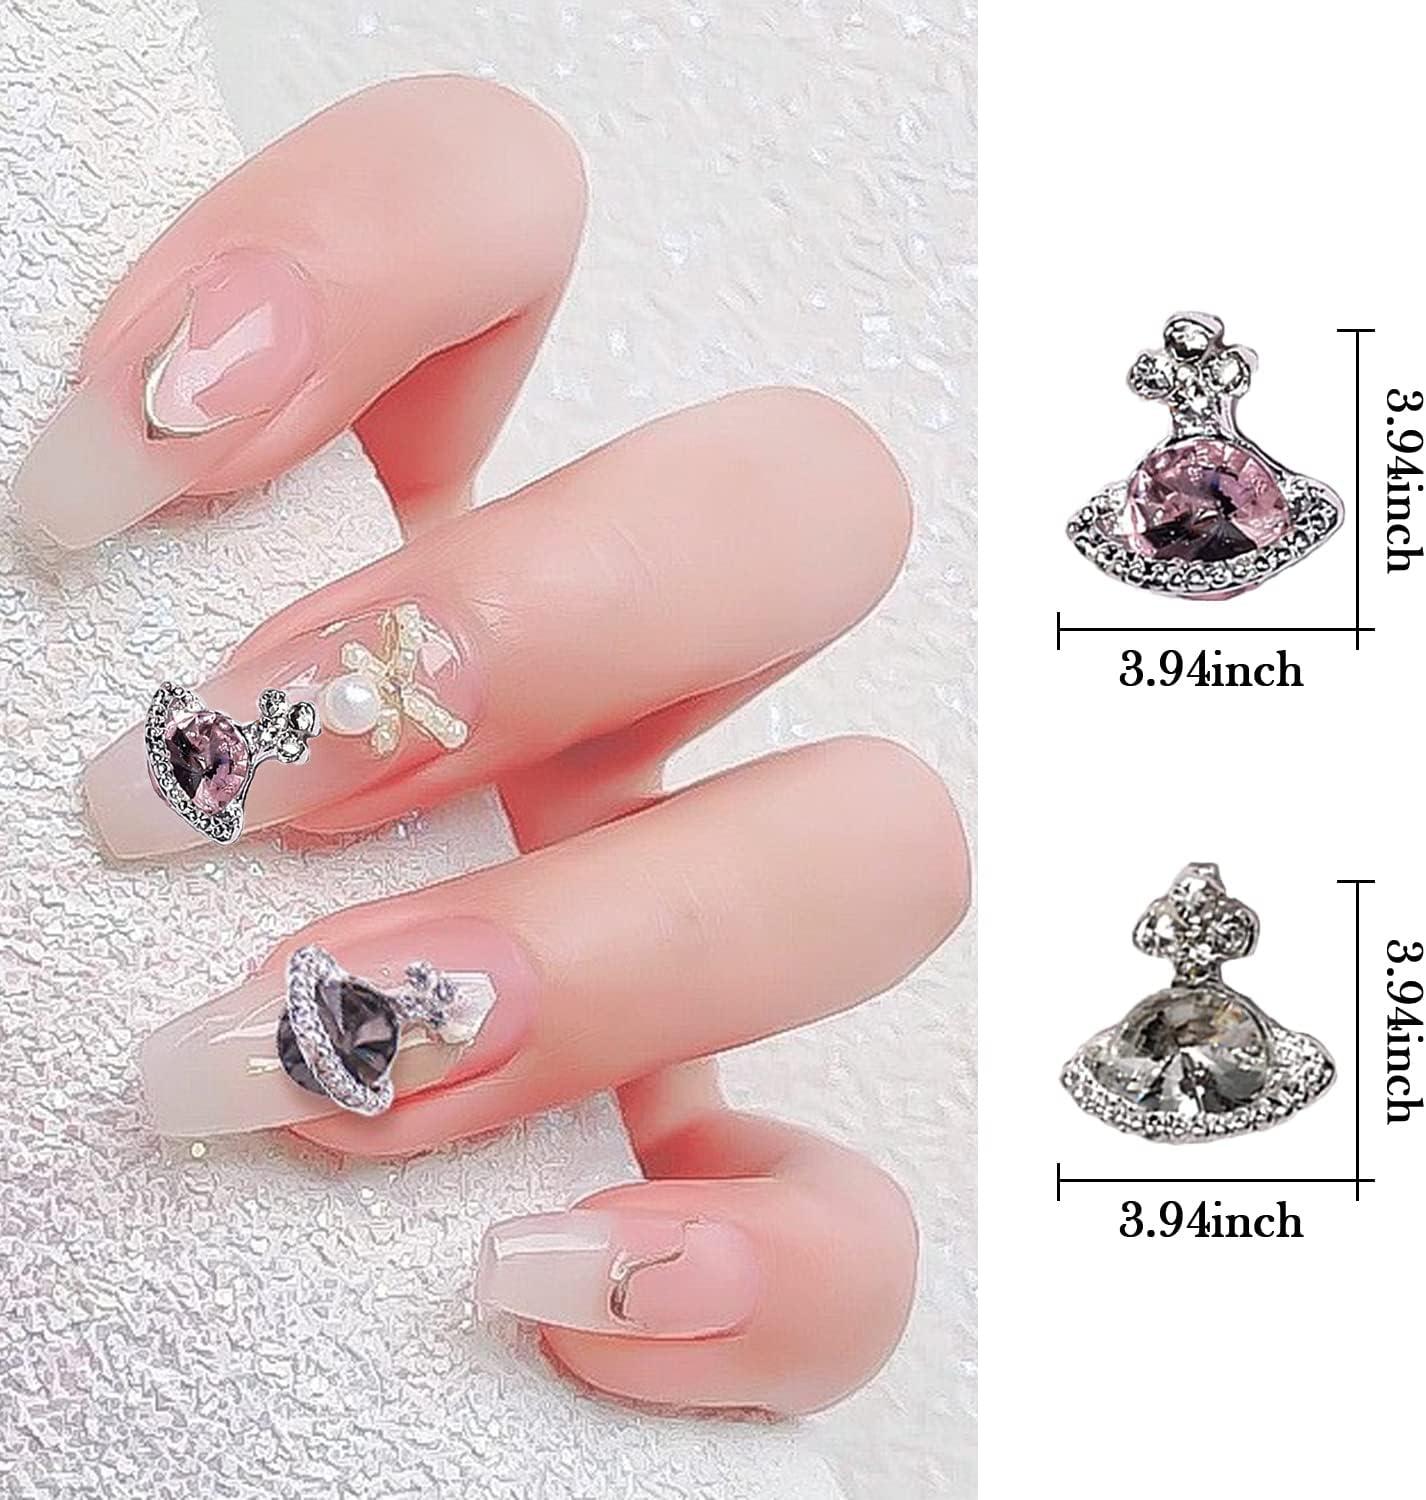  25 PCS Planet Nail Art Charms White Pink 3D Cross Nail Art  Supplies with Rhinestones Saturn Shape Design Nail Gems Shiny Nail Jewelry  Acrylic Accessories for Women Nail Decorations : Beauty